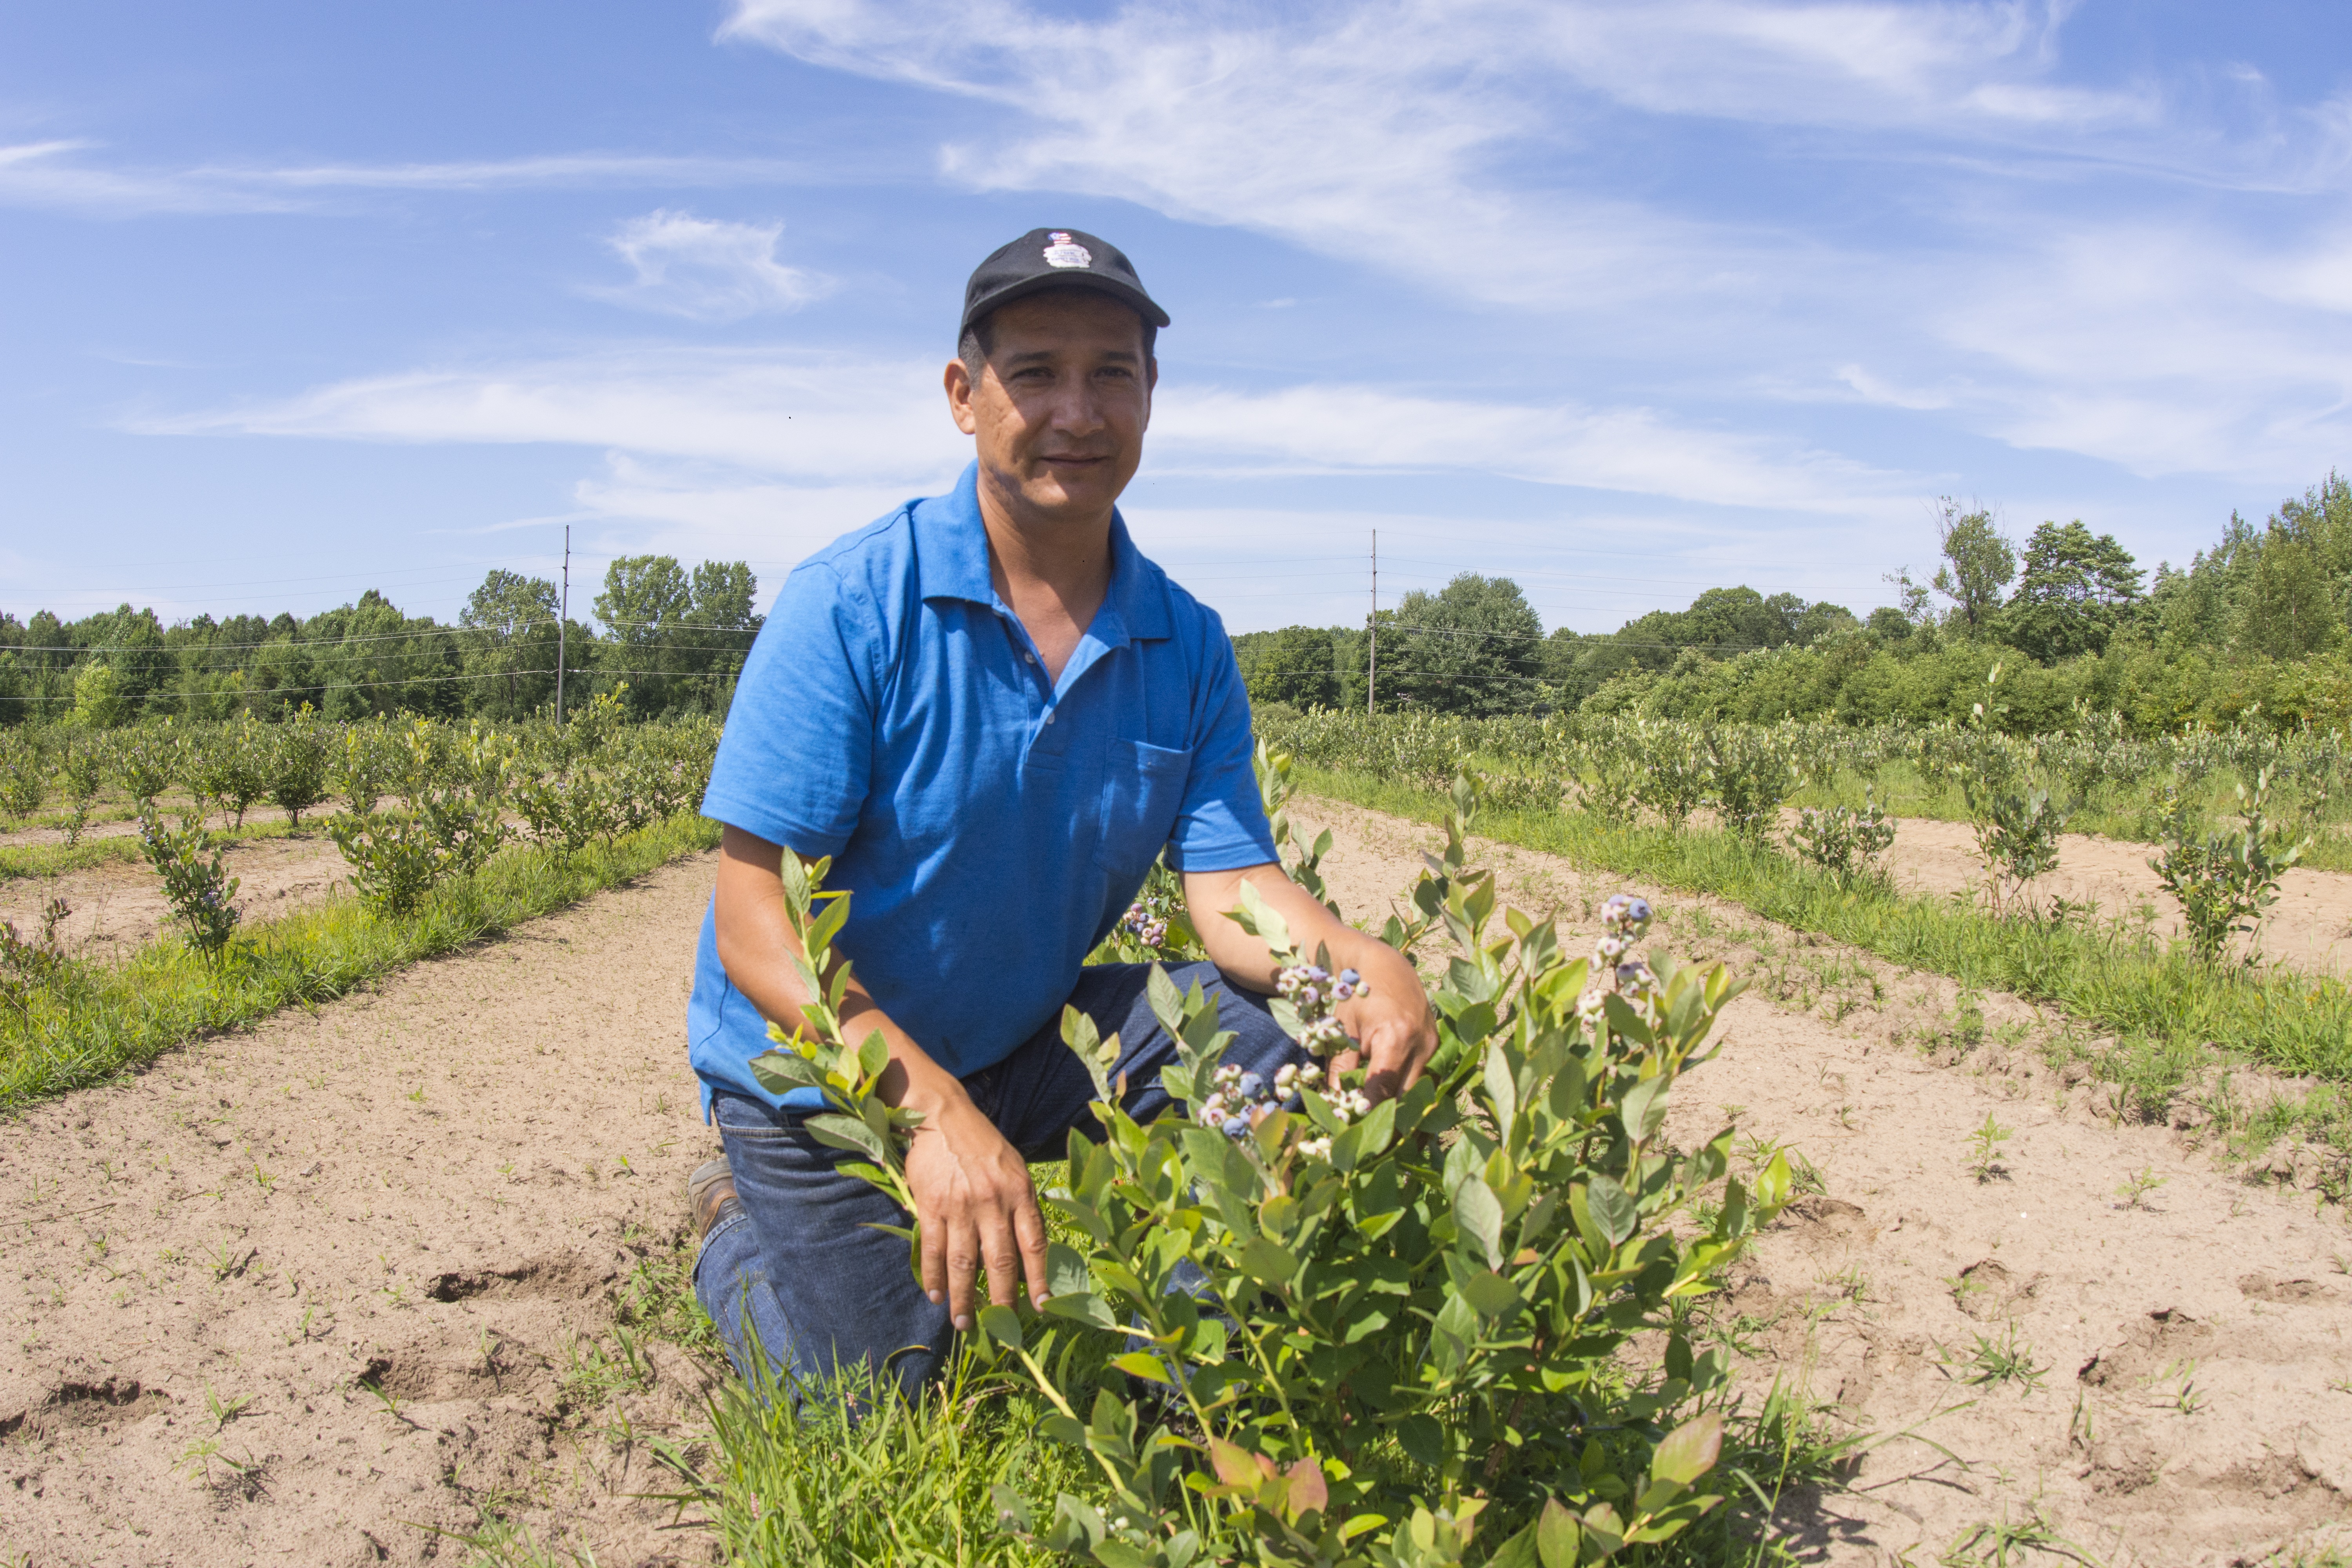 Blueberry grower, Nahun Avalos, inspects a blueberry bush at his farm in southwest Michigan.